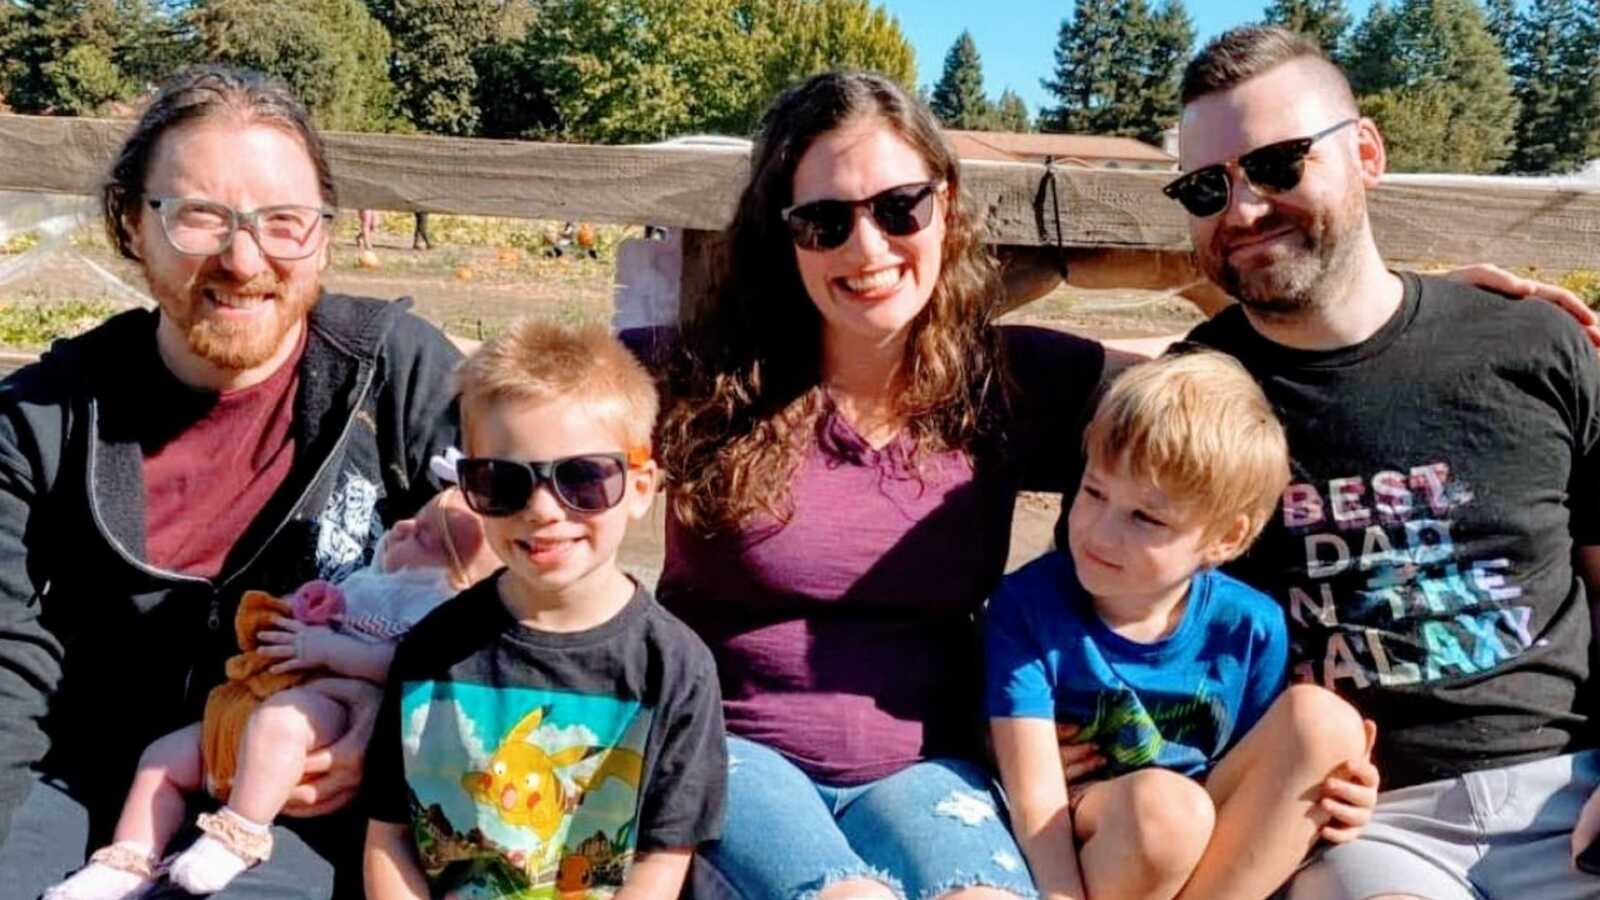 Co-parents take a photo with their children while all on a hayride together